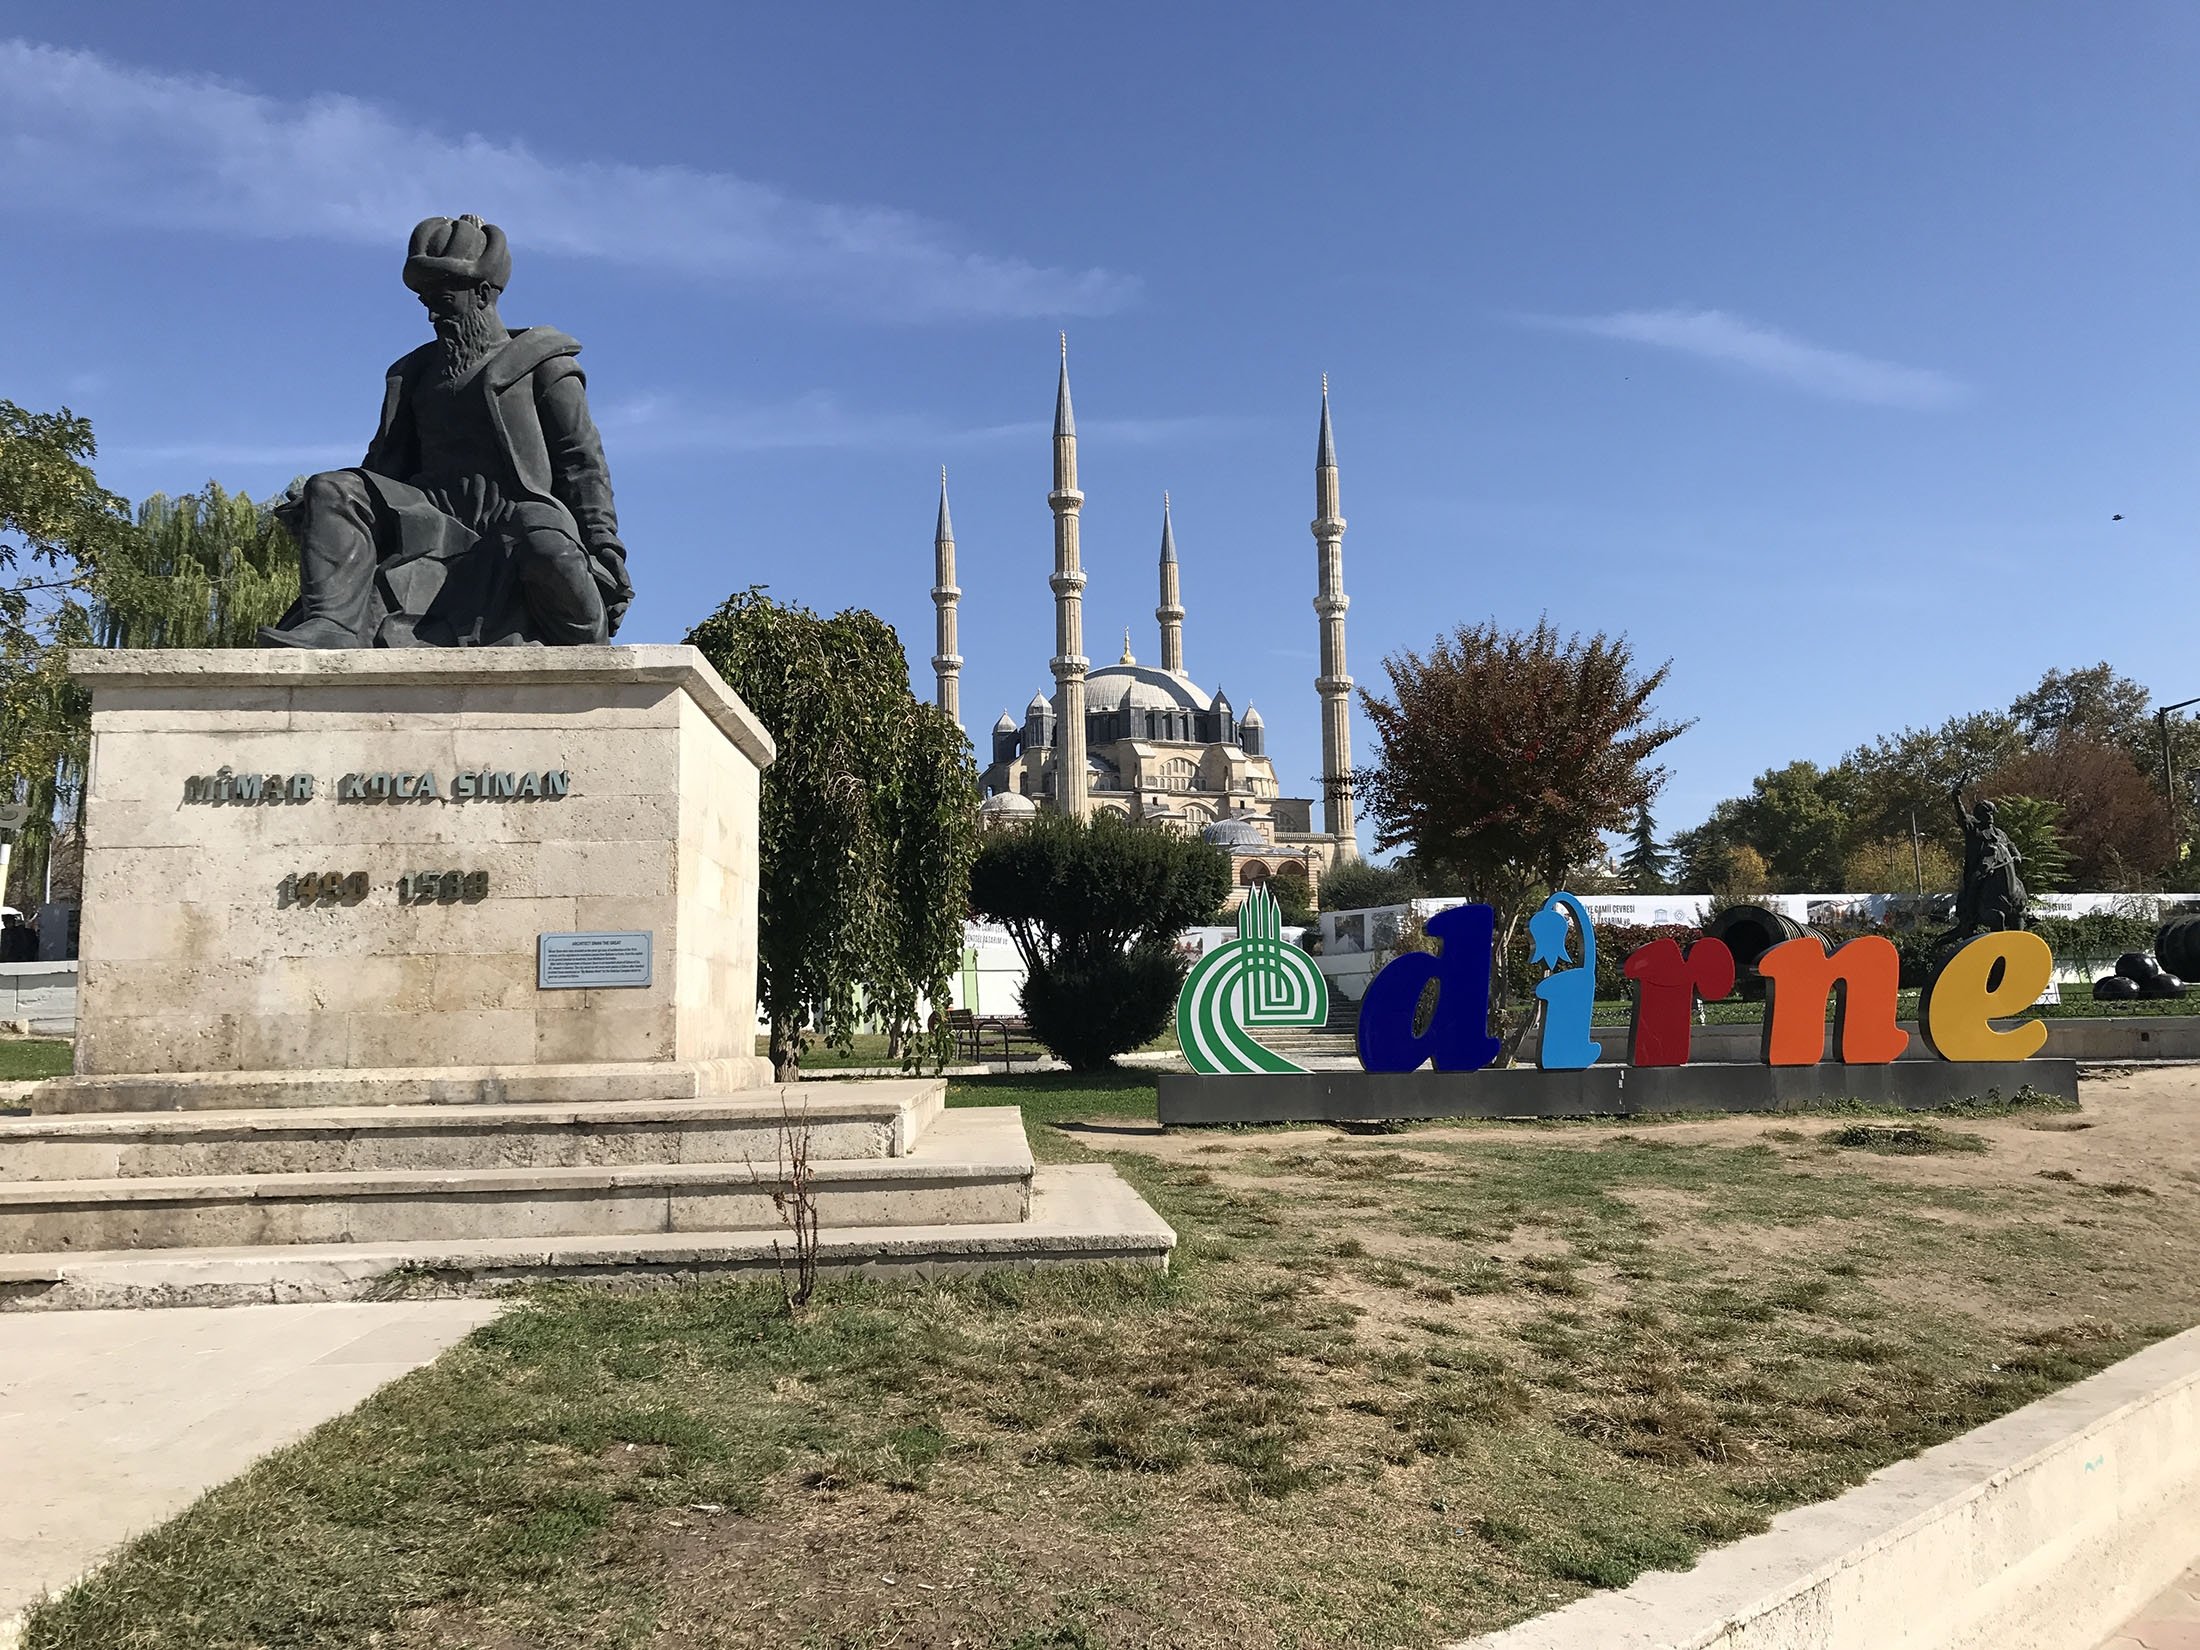 A statue of Ottoman architect Mimar Sinan with his masterpiece Selimiye Mosque in the background. (Photo by Özge Şengelen)